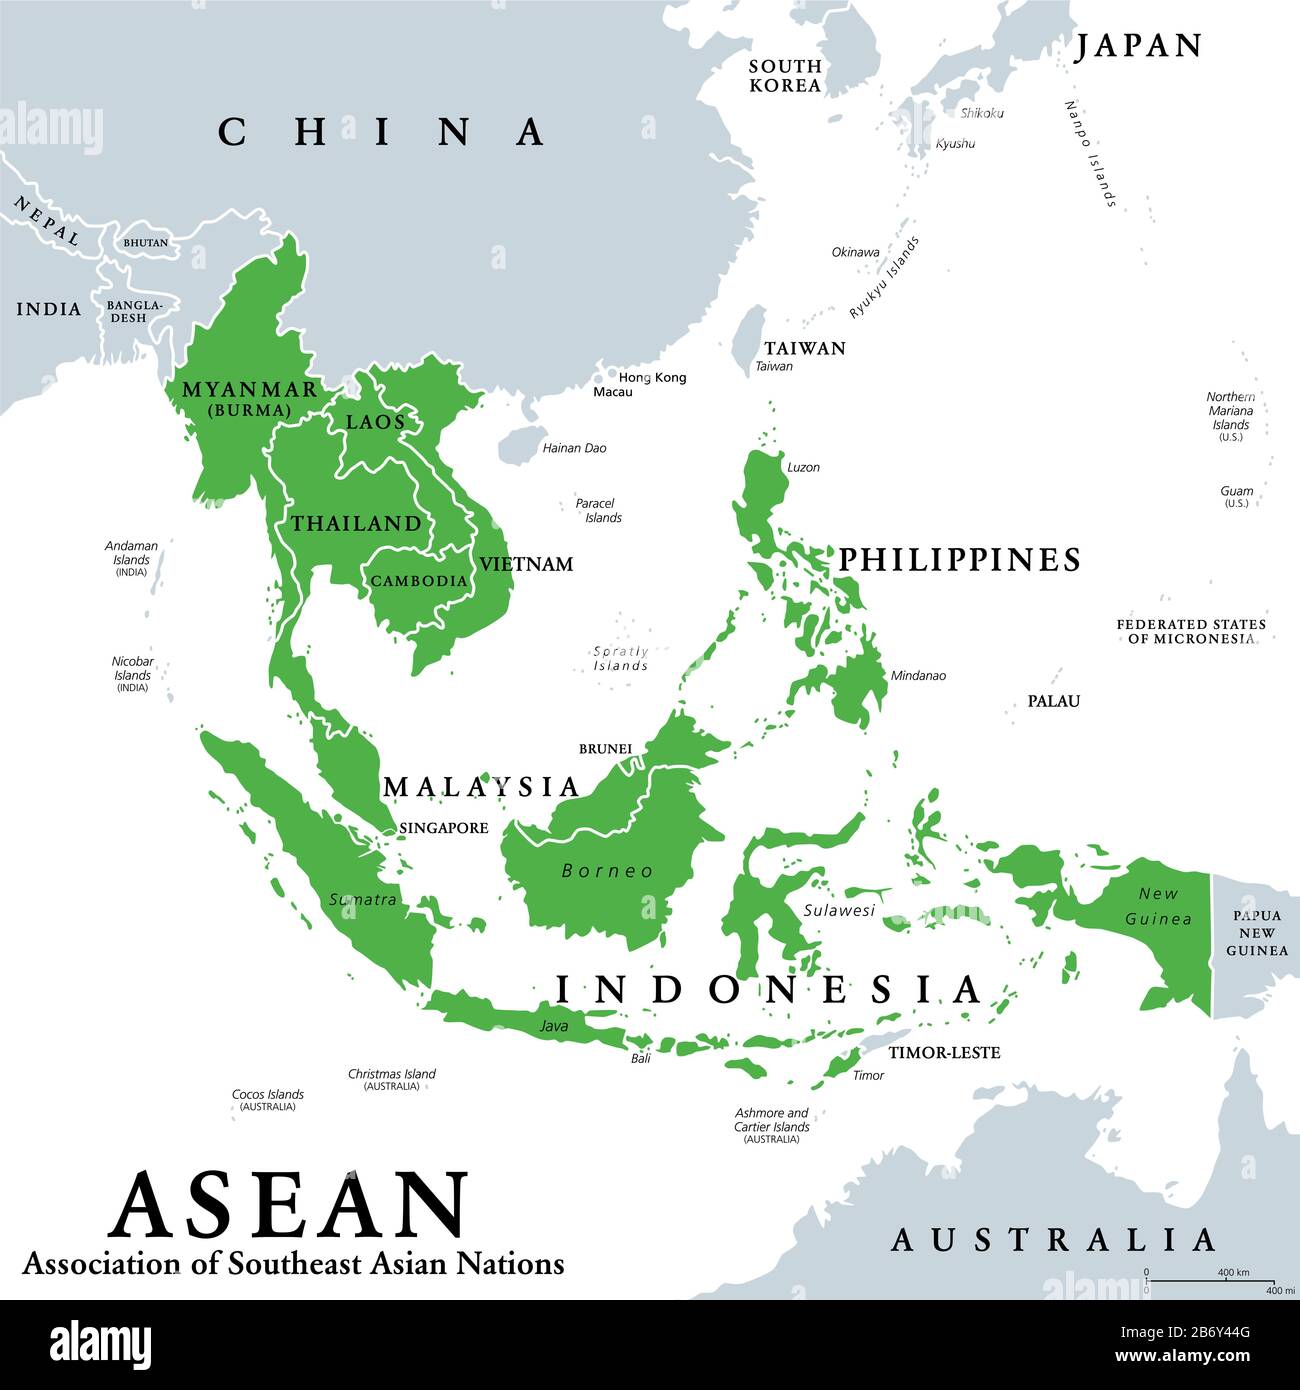 ASEAN member states, political map. Association of Southeast Asian Nations, a regional intergovernmental organization with 10 member countries. Stock Photo